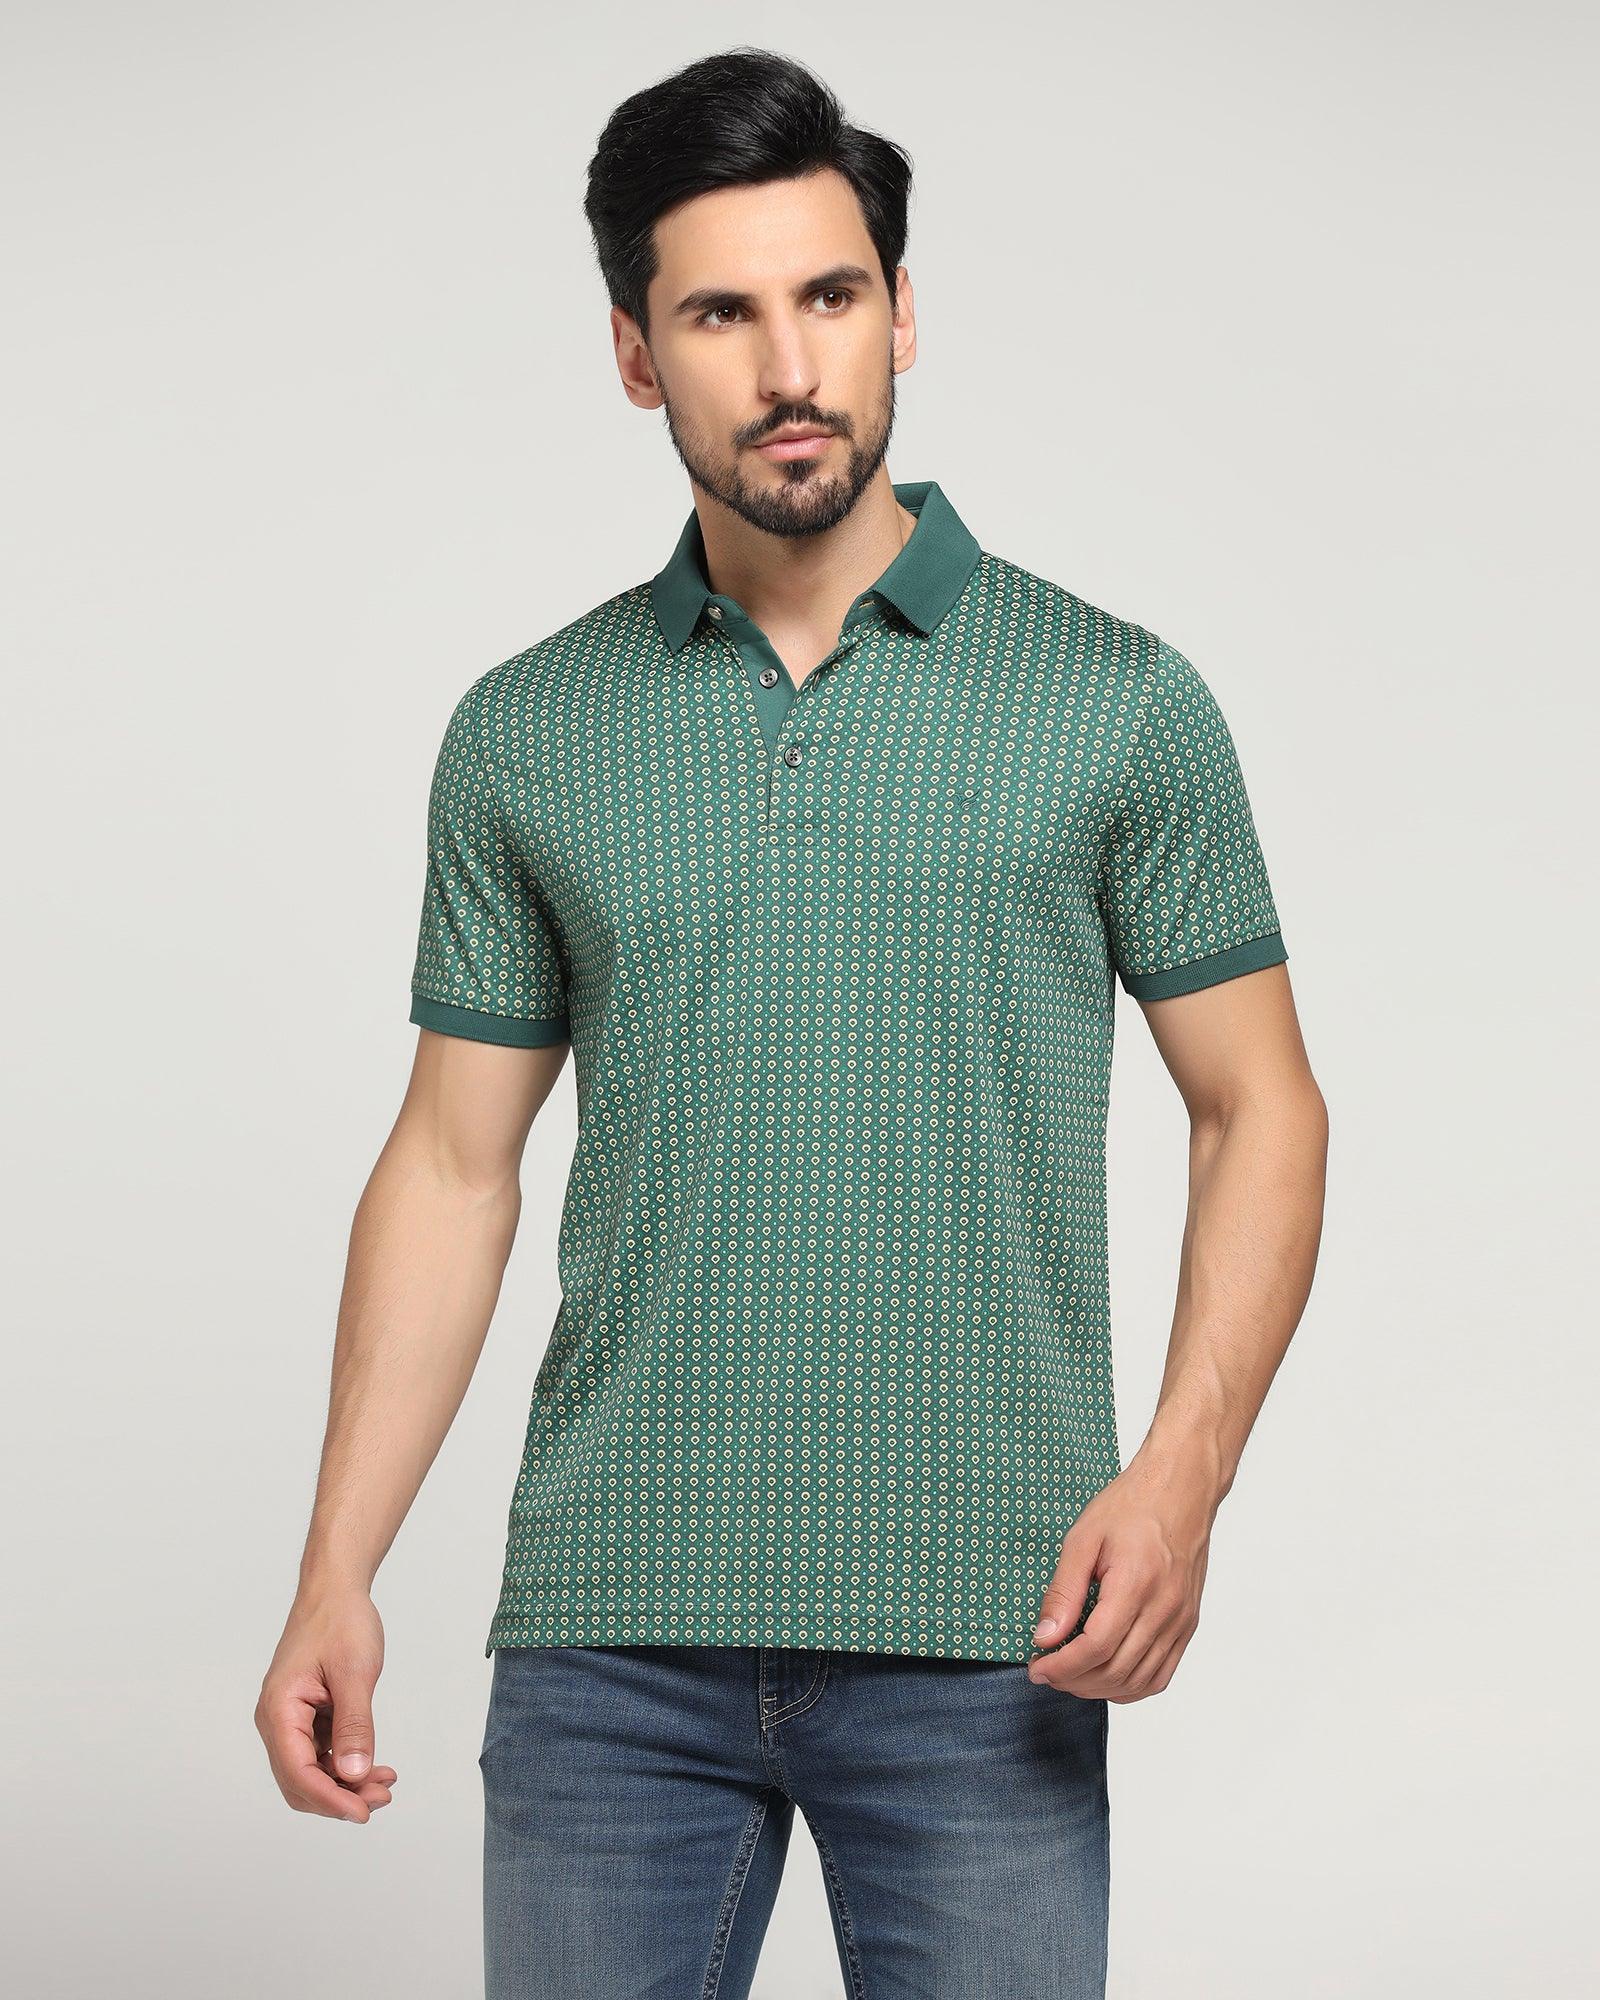 polo forest green printed t shirt - faber